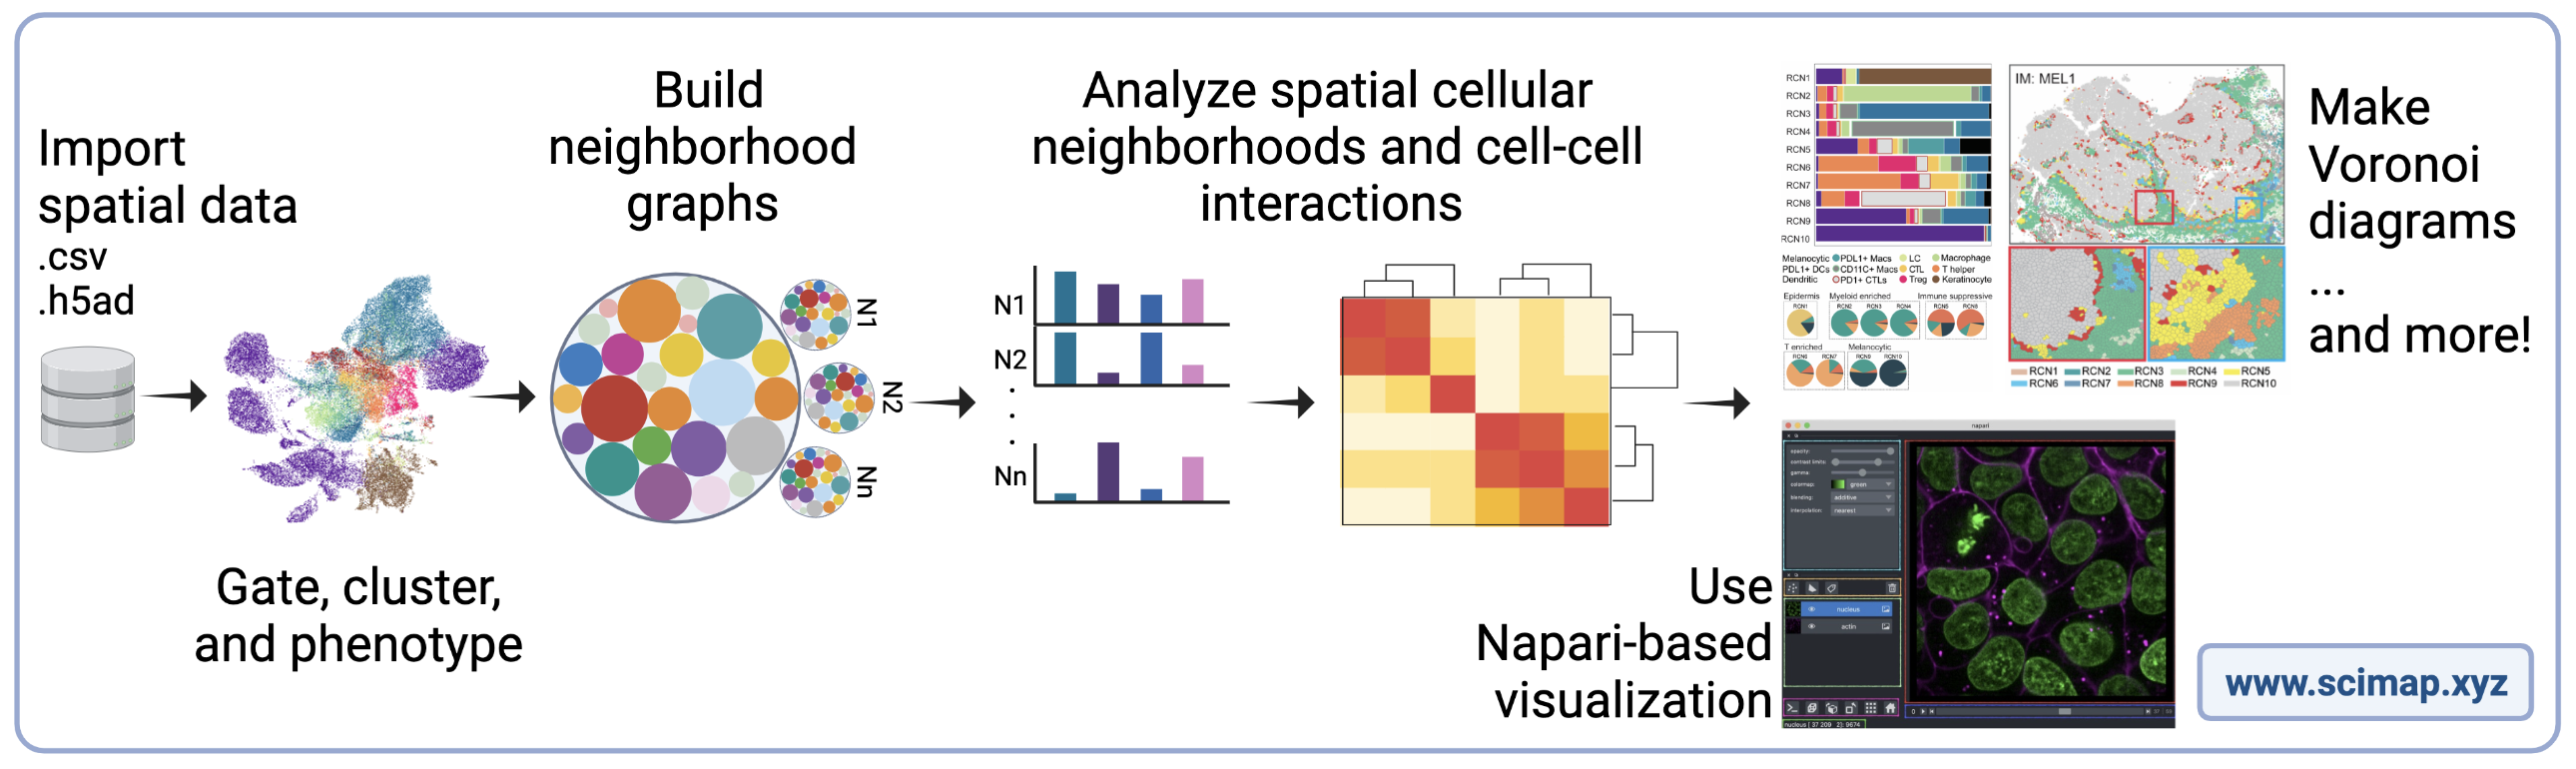 Overview of SCIMAP. Spatial cell data is imported into SCIMAP and used to gate, cluster, and phenotype the data, build neighborhood graphs, then analyze spatial cellular neighborhoods and cell-cell interactions. The data can be visualized with Napari, used to make Voronoi diagrams, and more!